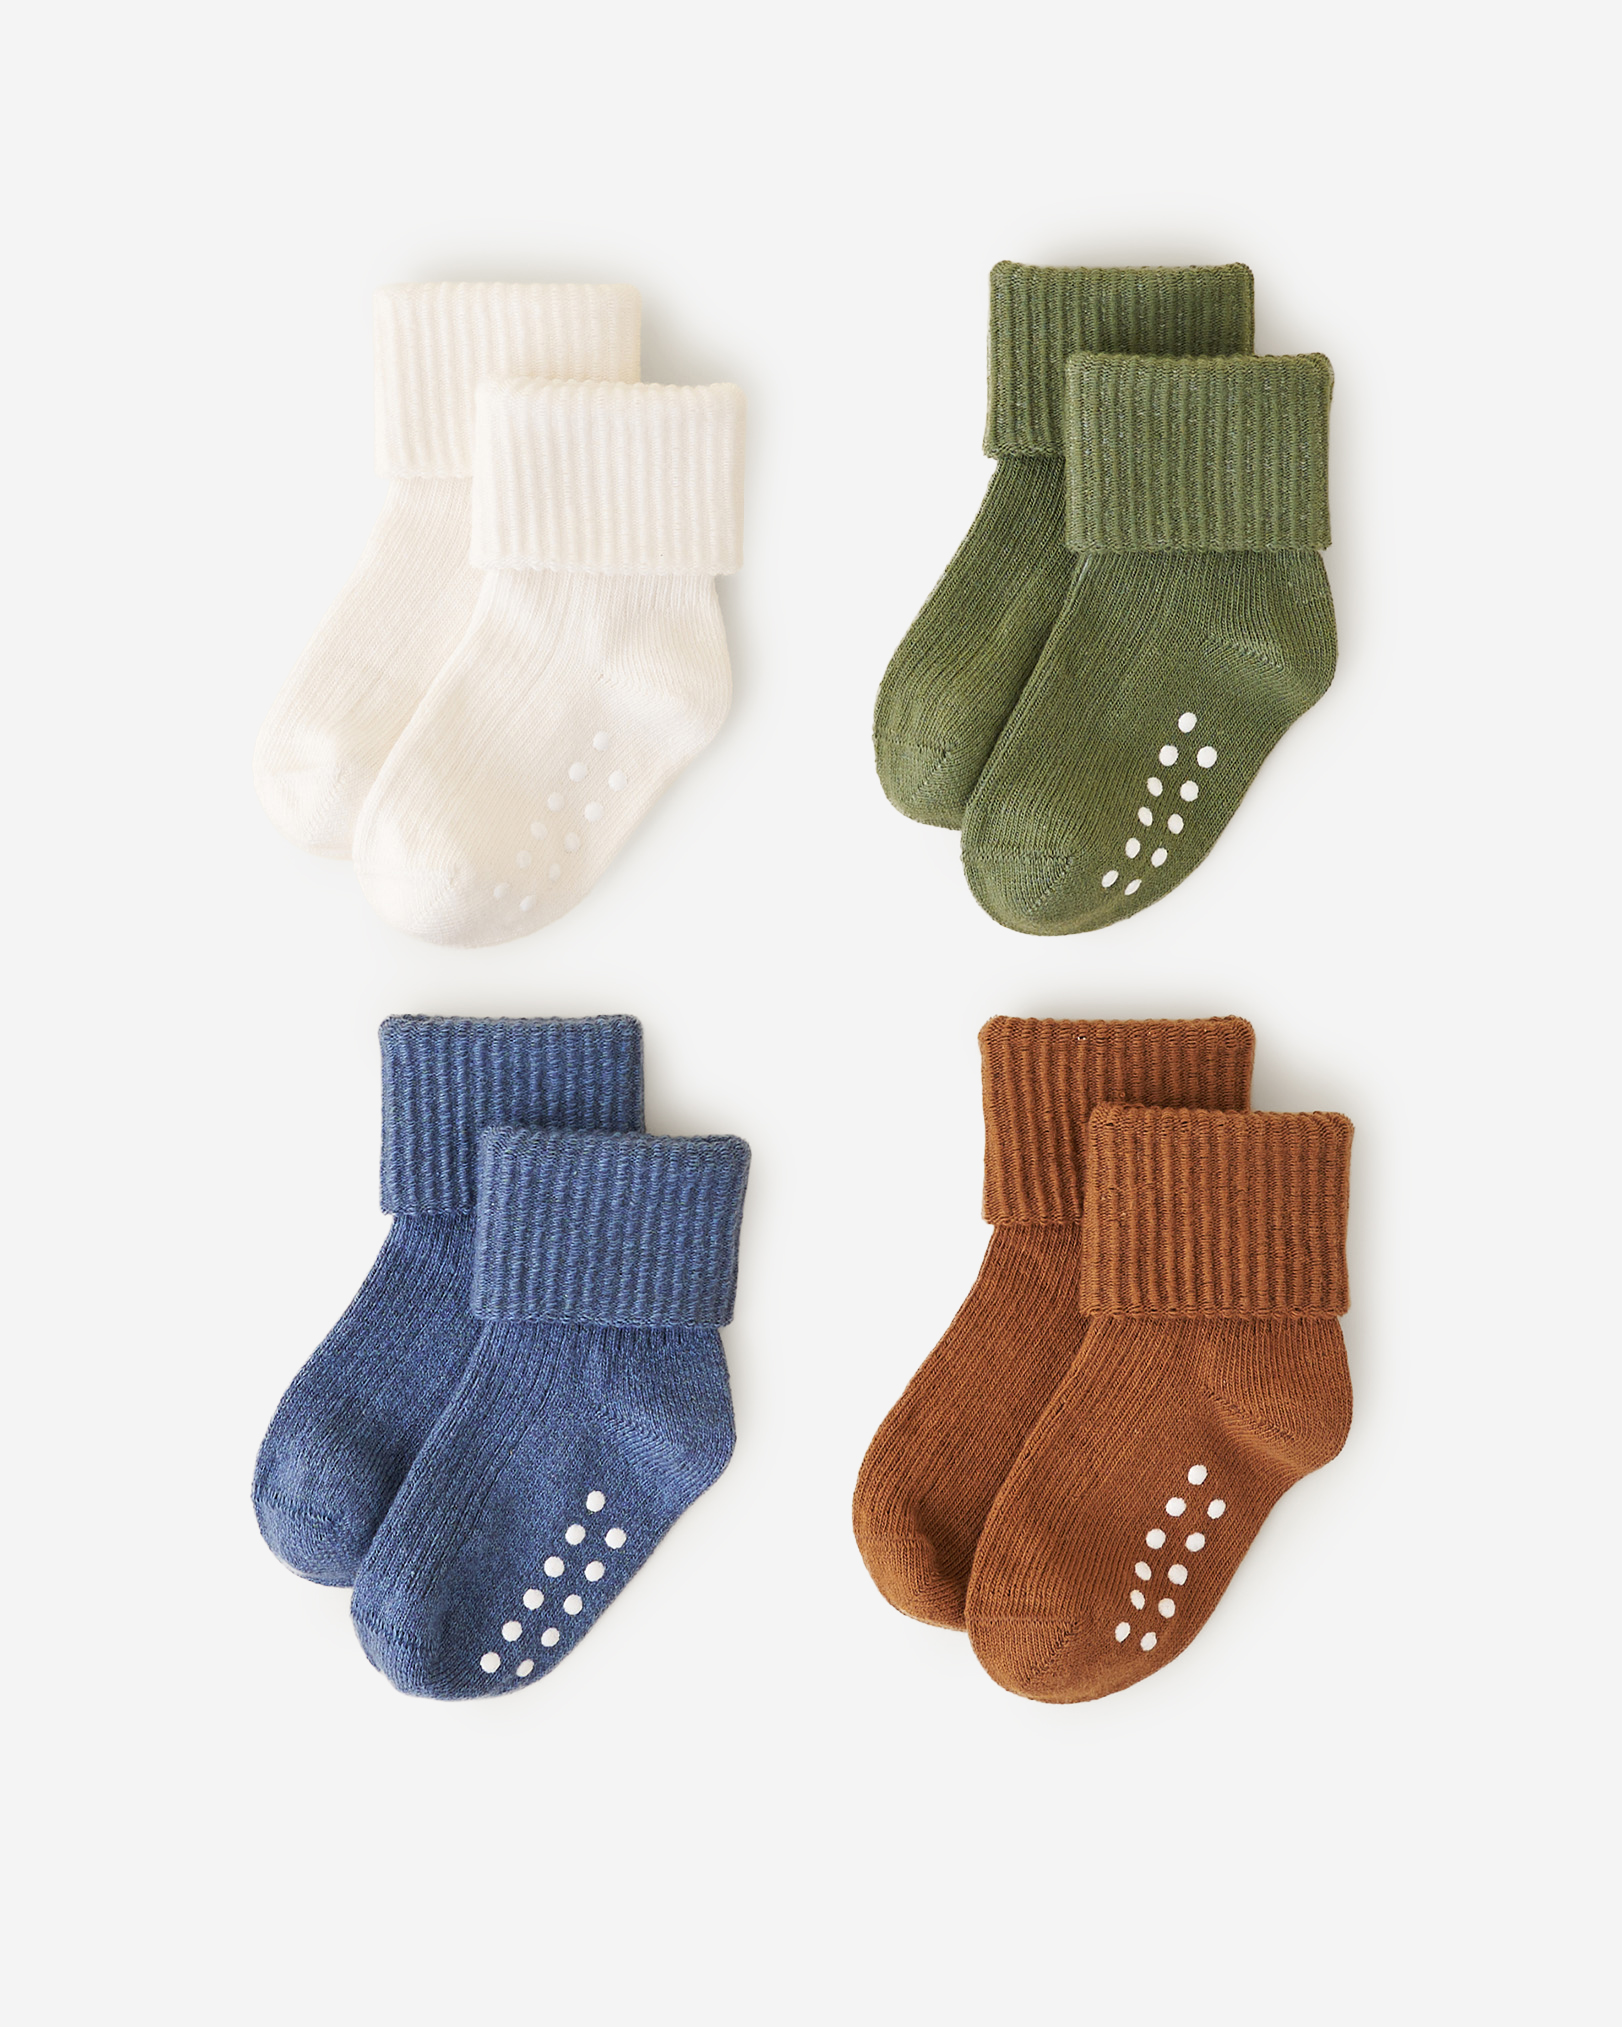 Roots Baby's First Sock 4 Pack in Cactus Green Mix